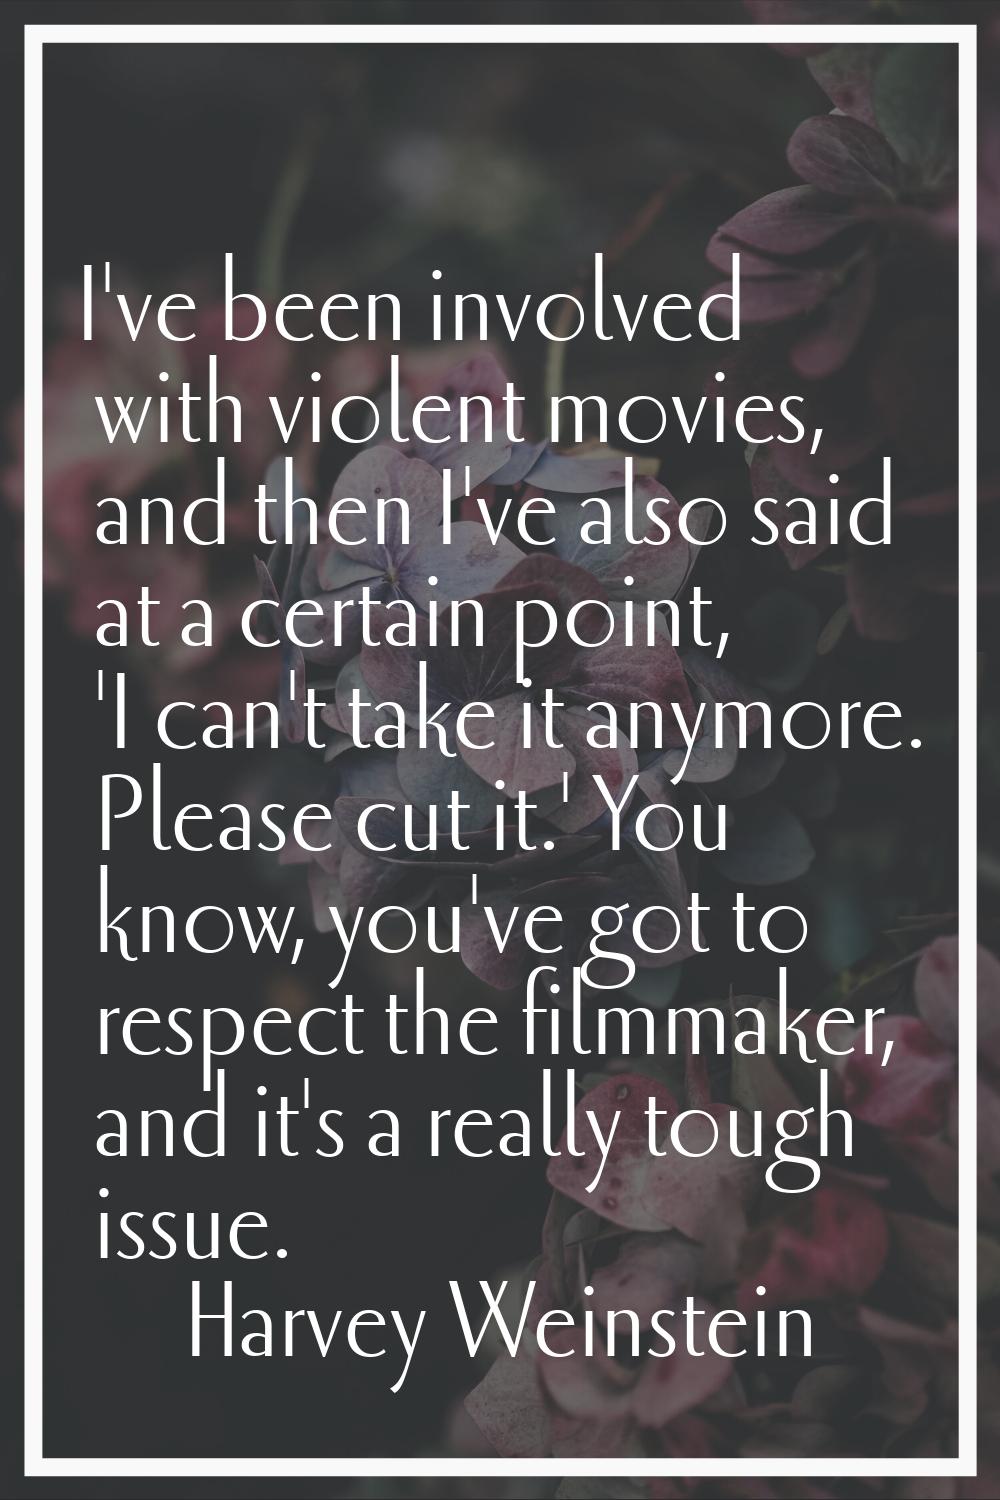 I've been involved with violent movies, and then I've also said at a certain point, 'I can't take i